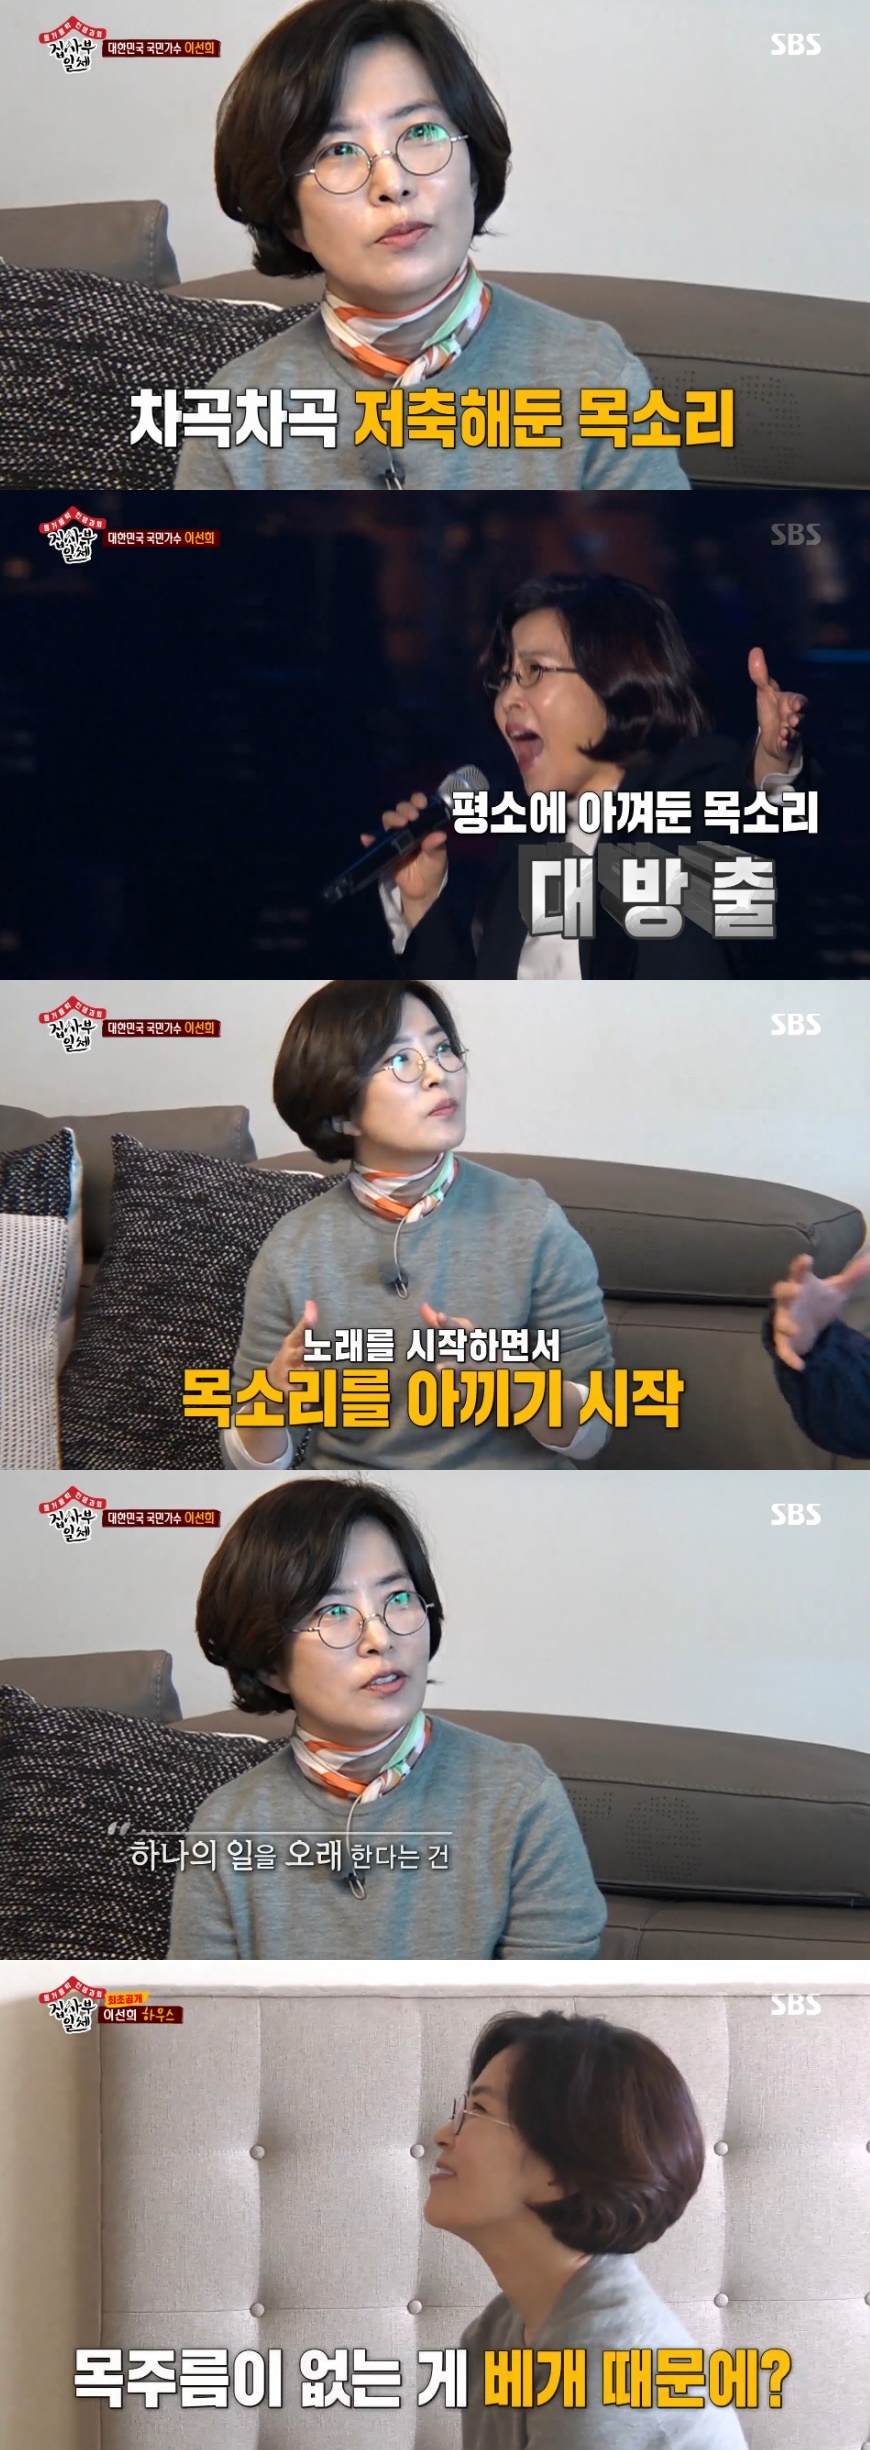 Lee Sun-hee was not a national singer for nothing. Lee Sun-hee was impressed by the life of temperance beyond imagination.Lee Sun-hee appeared on SBS Good Sunday - All The Butlers on May 27th as the 10th Master.The first master singer, Jeon In-kwon, who appeared as a hint fairy who sneaked in before Lee Sun-hee appeared, said of Lee Sun-hee, It is a great friend who listened to our country.It was very popular. I helped you once. I helped you a lot. The most surprised member of Lee Sun-hees new master was by far the singer and actor Lee Seung-gi.He is also famous for his real life master, who led Lee Seung-gi to the music industry.Lee Seung-gi, who grew up dreaming of a singer at Lee Sun-hees house 14 years ago, would have been more interested in this filming.Lee Seung-gi headed to Lee Sun-hees home and told members: I stayed with Lee Sun-hee before my debut, but theres a caution.His life is very different. No one in Korea manages him. Its a survival method. Haru is going to be hungry.I think those parts are just very embarrassing. I have been living together for a long time. Even if it is not Master Lee Seung-gi, the modifier describing Lee Sun-hee can not be counted.Lee Sun-hee, who made his official debut in the music industry in 1984 with MBCs 5th riverside song festival, said, From J to I am always you, Meet you among them, I have been reborn as a talented vocalist who has been popularly loved by many songs such as Old Time.But it is the first time in 34 years that a real life is revealed through broadcasting. Lee Sun-hee, who is nervous about shooting at the actual house, said in a shy voice, Its a win.I only trust you, he said.The extraordinary vocals, stage grip and presence were not easily created; Lee Sun-hee said he refrained from actual conversations to protect his neck, and said he spoke in the least voice when he spoke.There were as many scarfs in the dressing room as pants, which Lee Sun-hee explained: I always do scarfs, I do it in the summer to protect my neck.I think I have reduced the volume more than the TV because I see you two talking, said Lee Seung-gi, who said, Unlike when you sing, you usually speak small.Lee Sun-hee says, I speak small for my neck, Im more intensive and I need to save more energy to do it on stage, so Im saving it.I did not do it from the beginning, but I started singing and I did it. It seems to be a process of making moderation for a long time. I try not to say much. I write it when I talk. I wake up in the morning and do neck training.After finishing it, I start to talk lightly. Even when sleeping, he said he slept without a pillow for condition management; Lee Sun-hee said, I do not sleep with my original pillow.I feel a lot less fatigue on my back, and I sleep without it from then on. hwang hye-jin